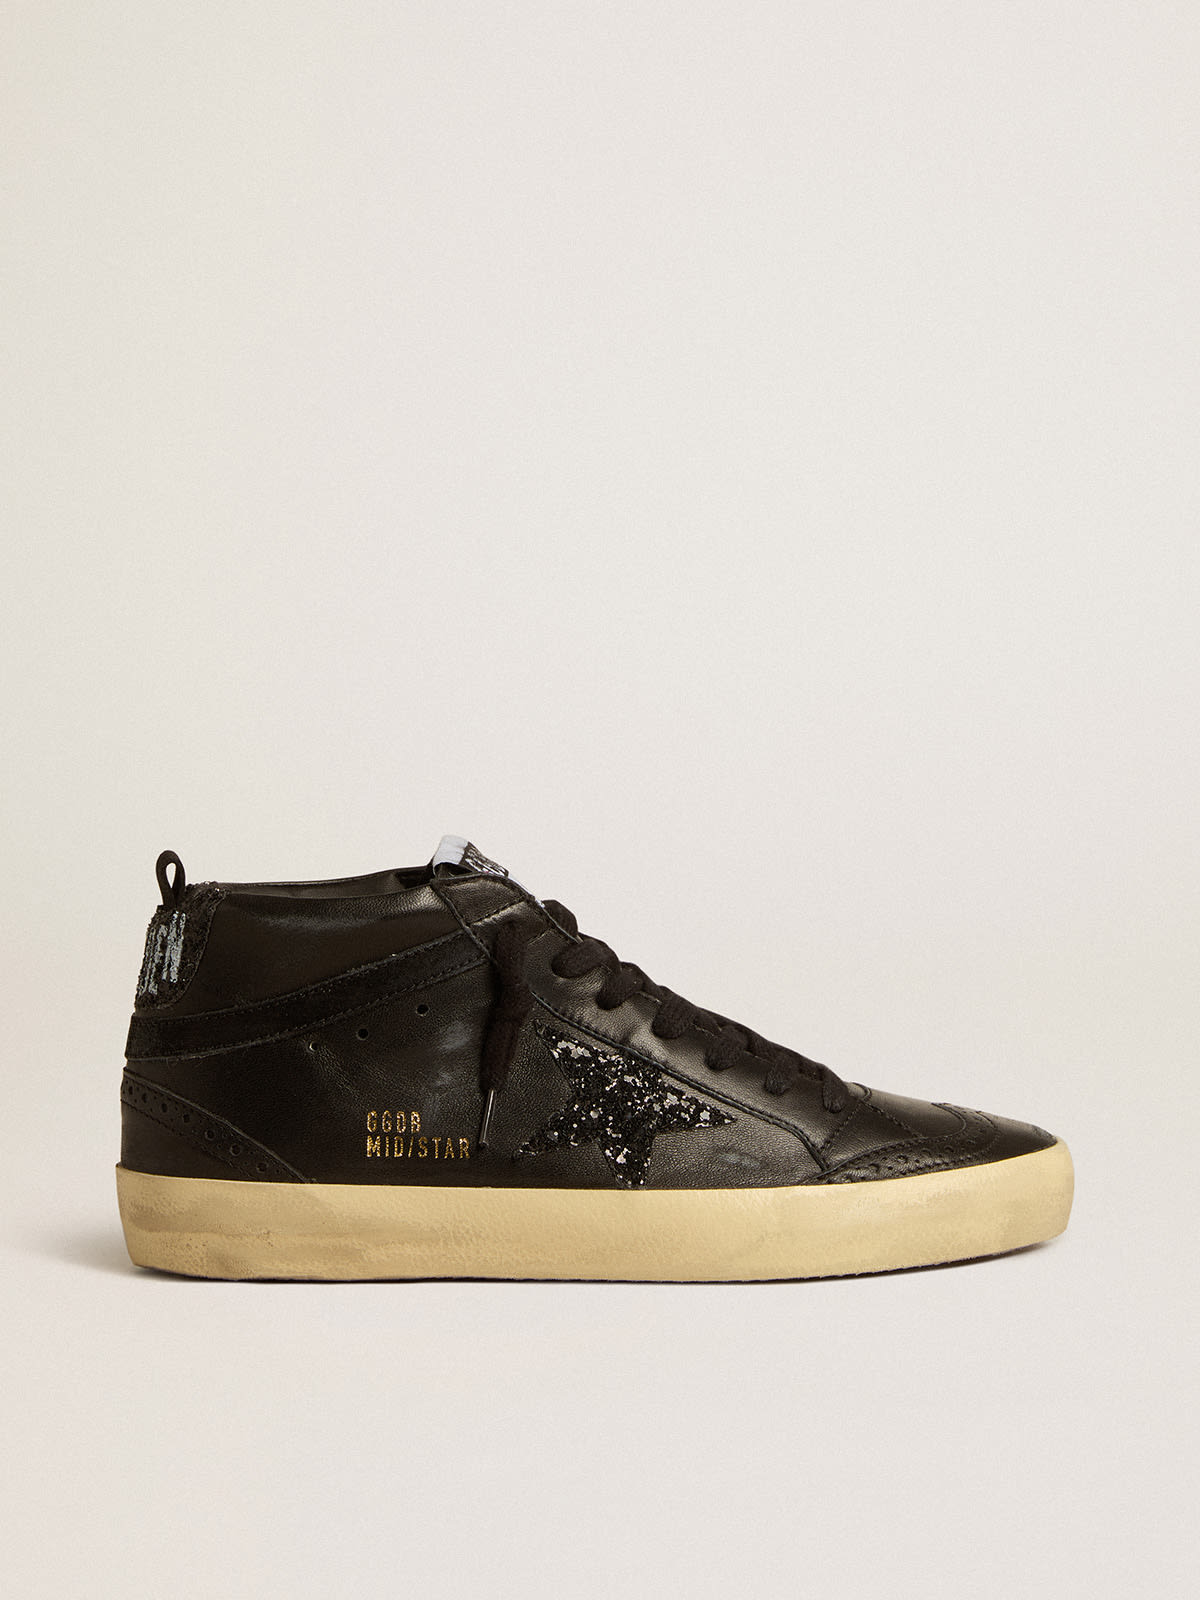 Golden Goose - Mid Star in black nappa with black glitter star and suede flash in 